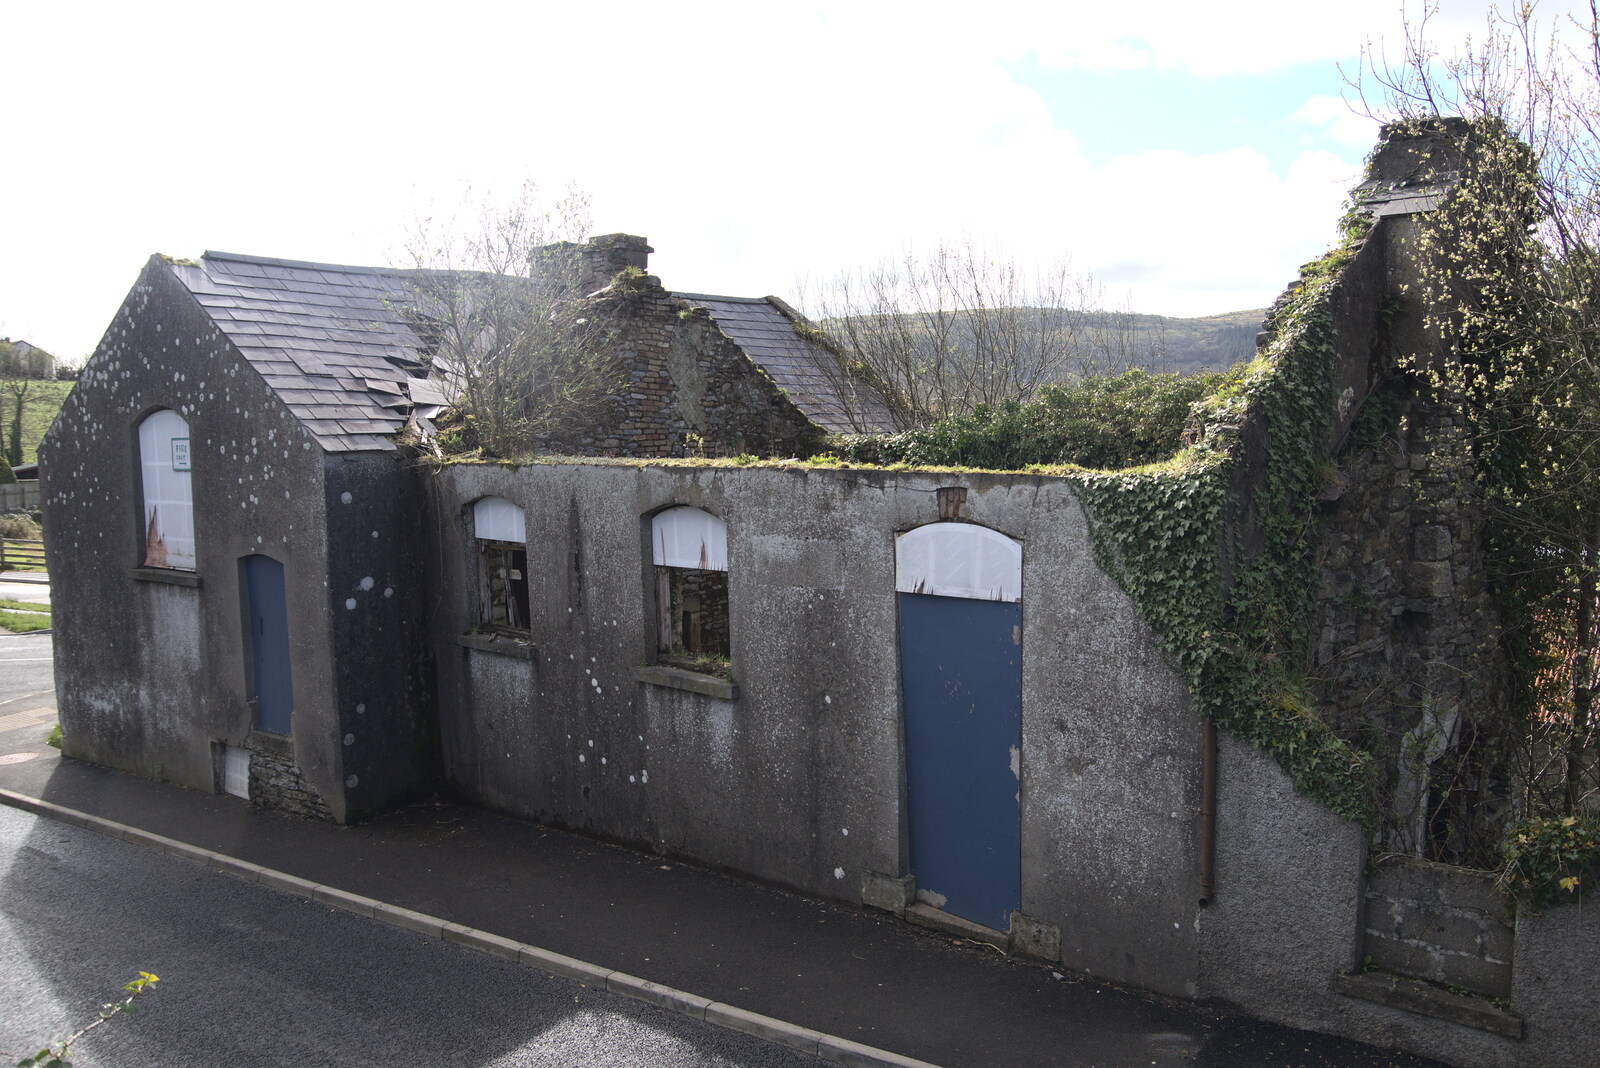 A derelict school from Manorhamilton and Bundoran, Leitrim and Donegal, Ireland - 16th April 2022